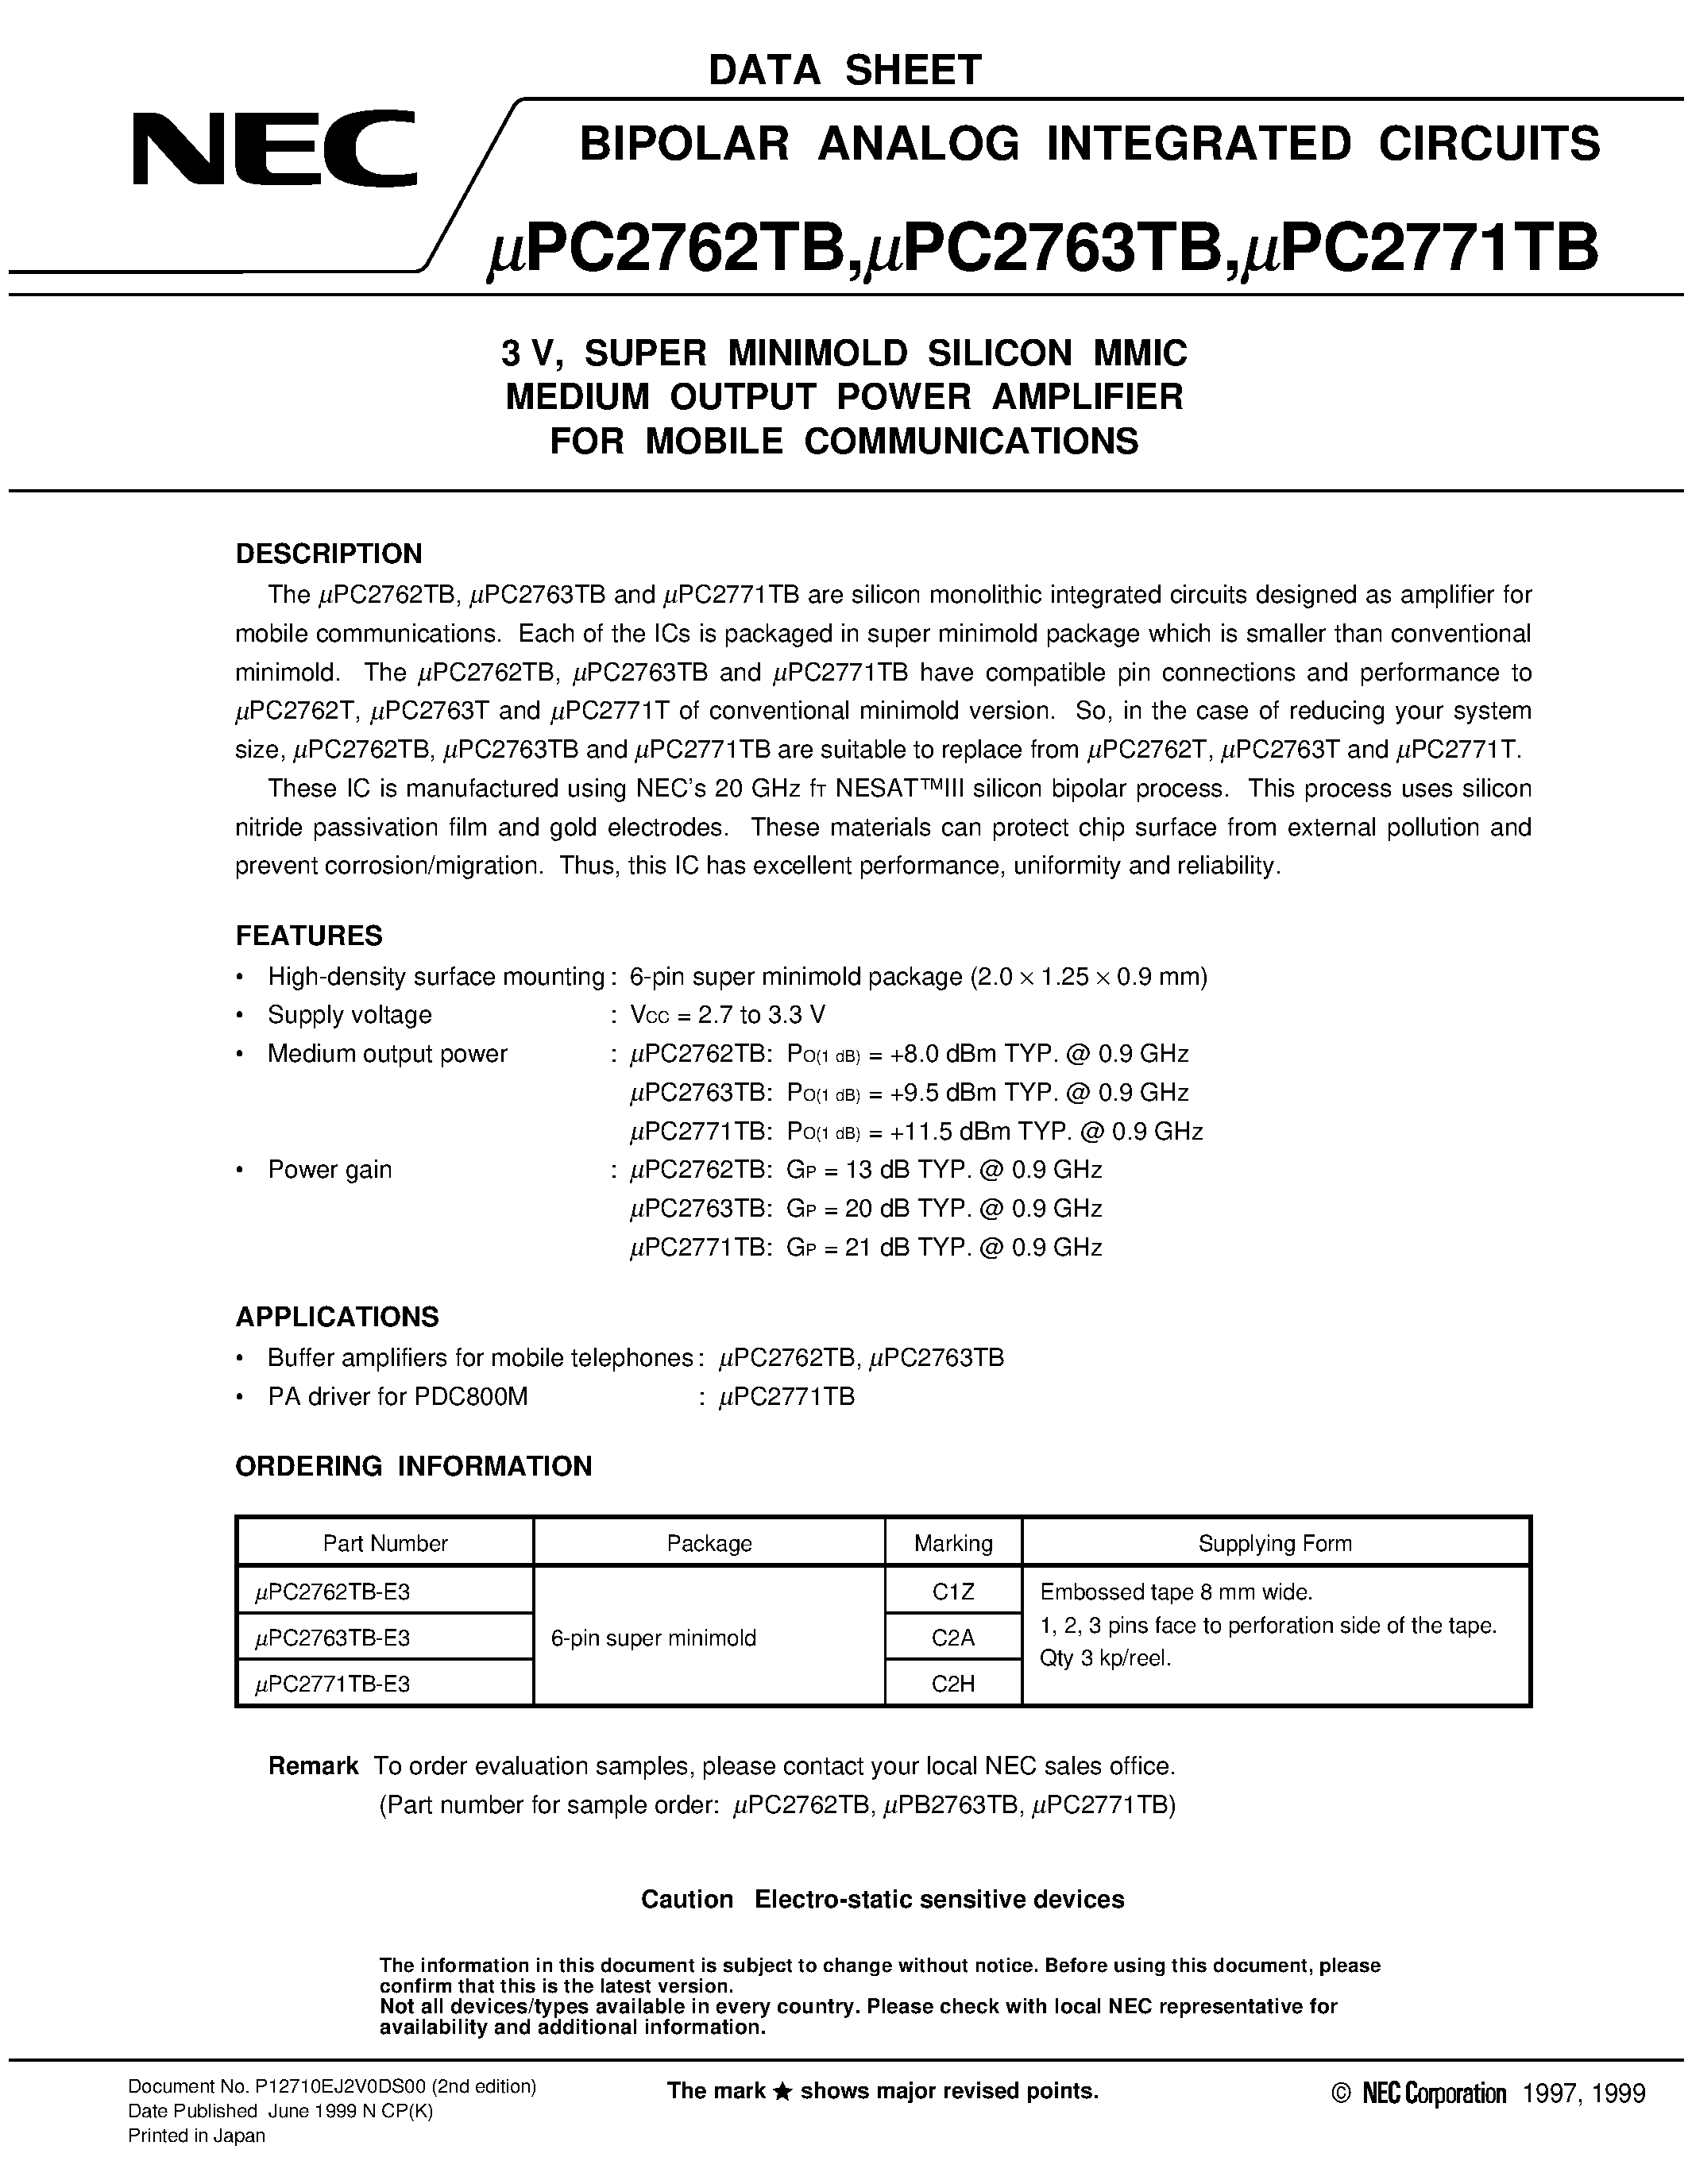 Datasheet UPC2762TB - 3 V/ 2.9 GHz SILICON MMIC MEDIUM OUTPUT POWER AMPLIFIER FOR MOBILE COMMUNICATIONS page 1